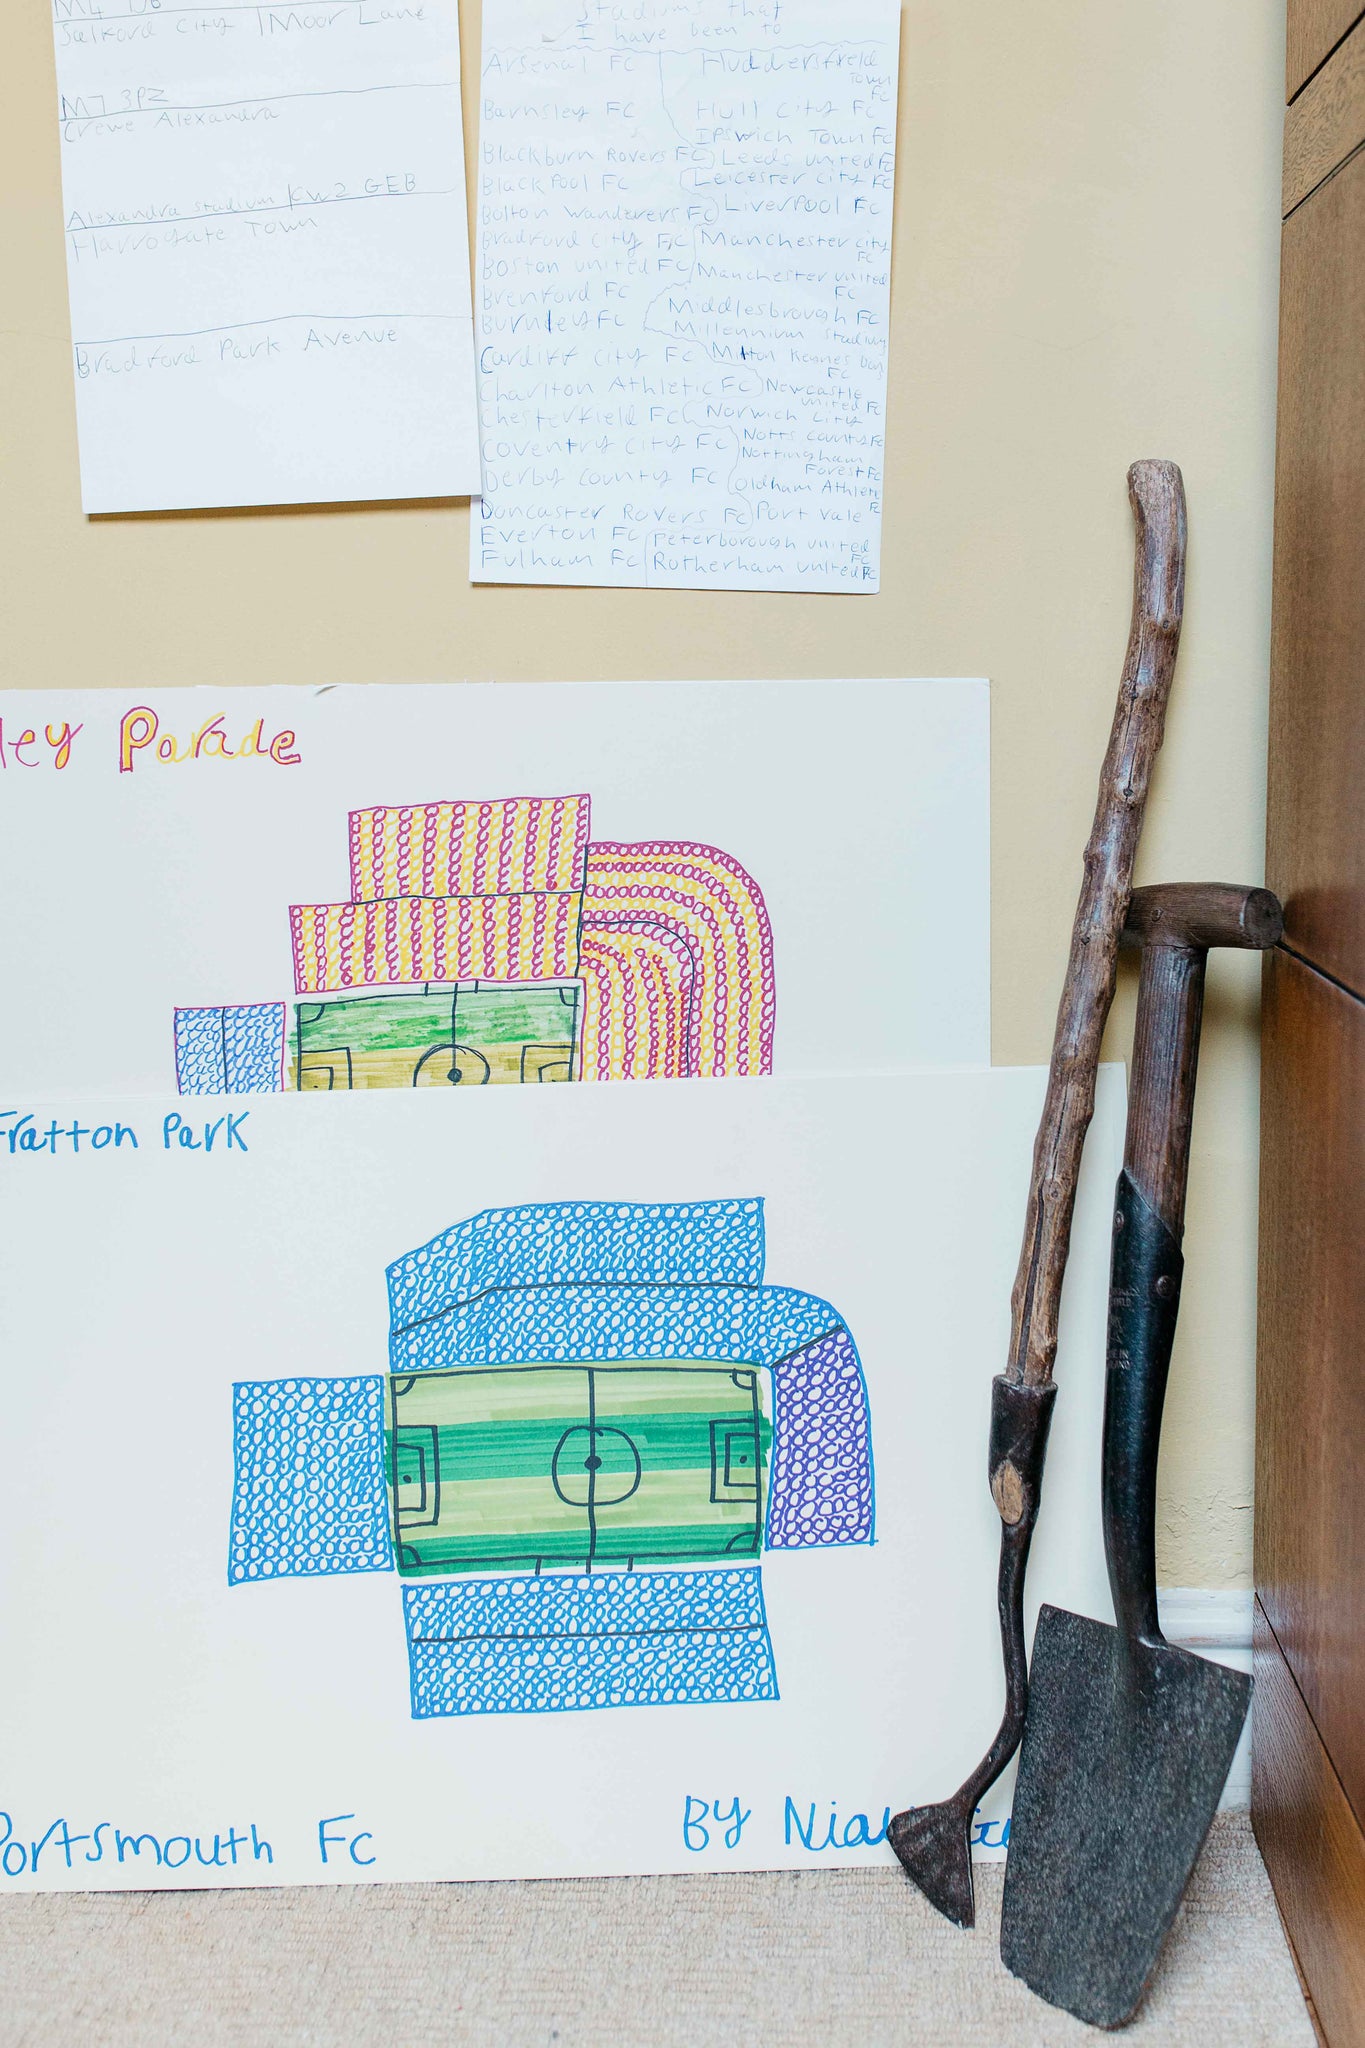 Two hand drawn football stadium drawings sit next to two gardening tools against a wall